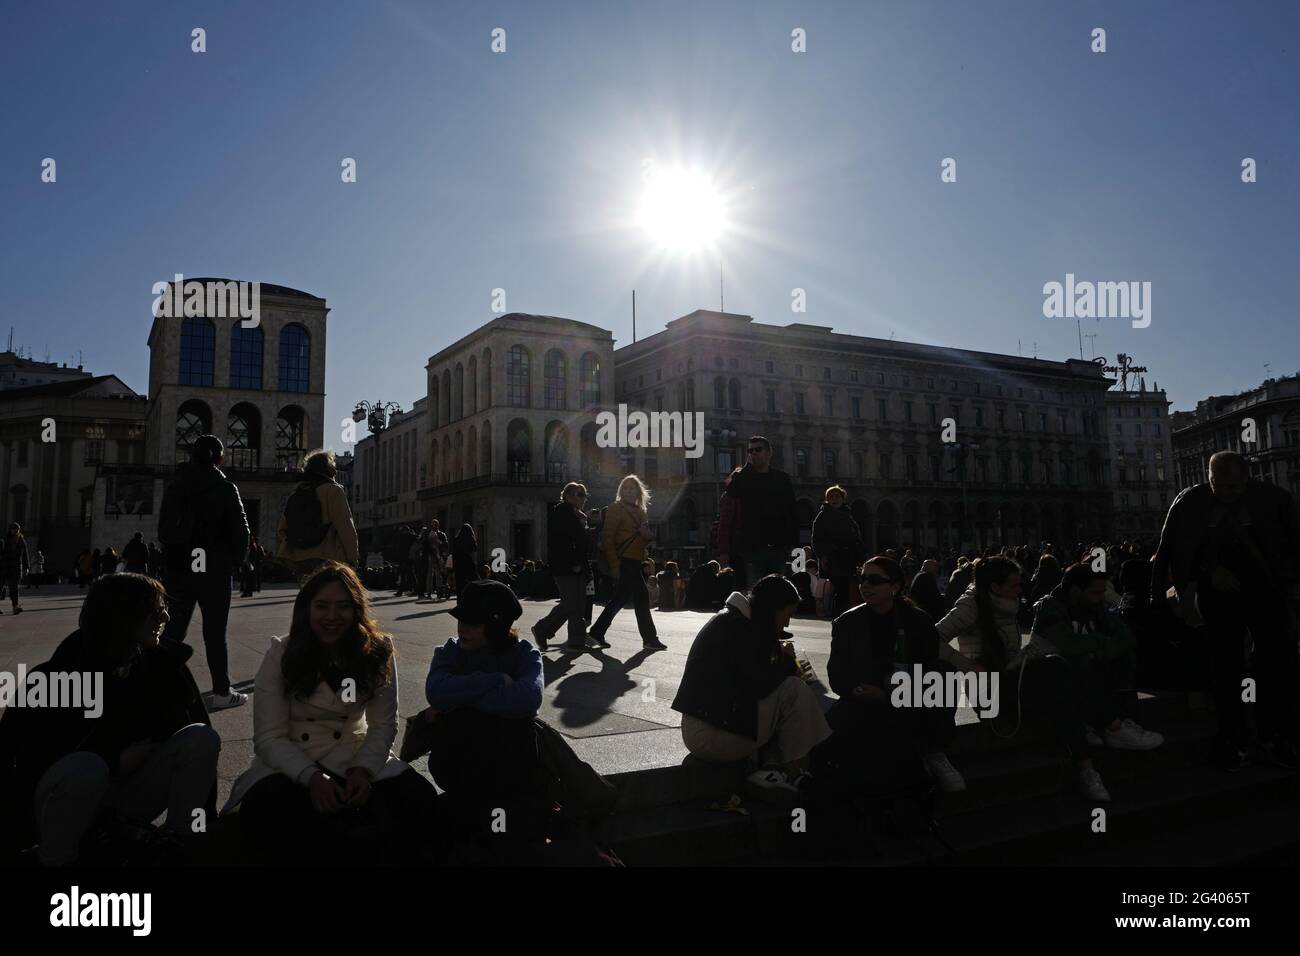 People seat on Duomo's cathedral steps, in downtown, Milan, Italy. Stock Photo